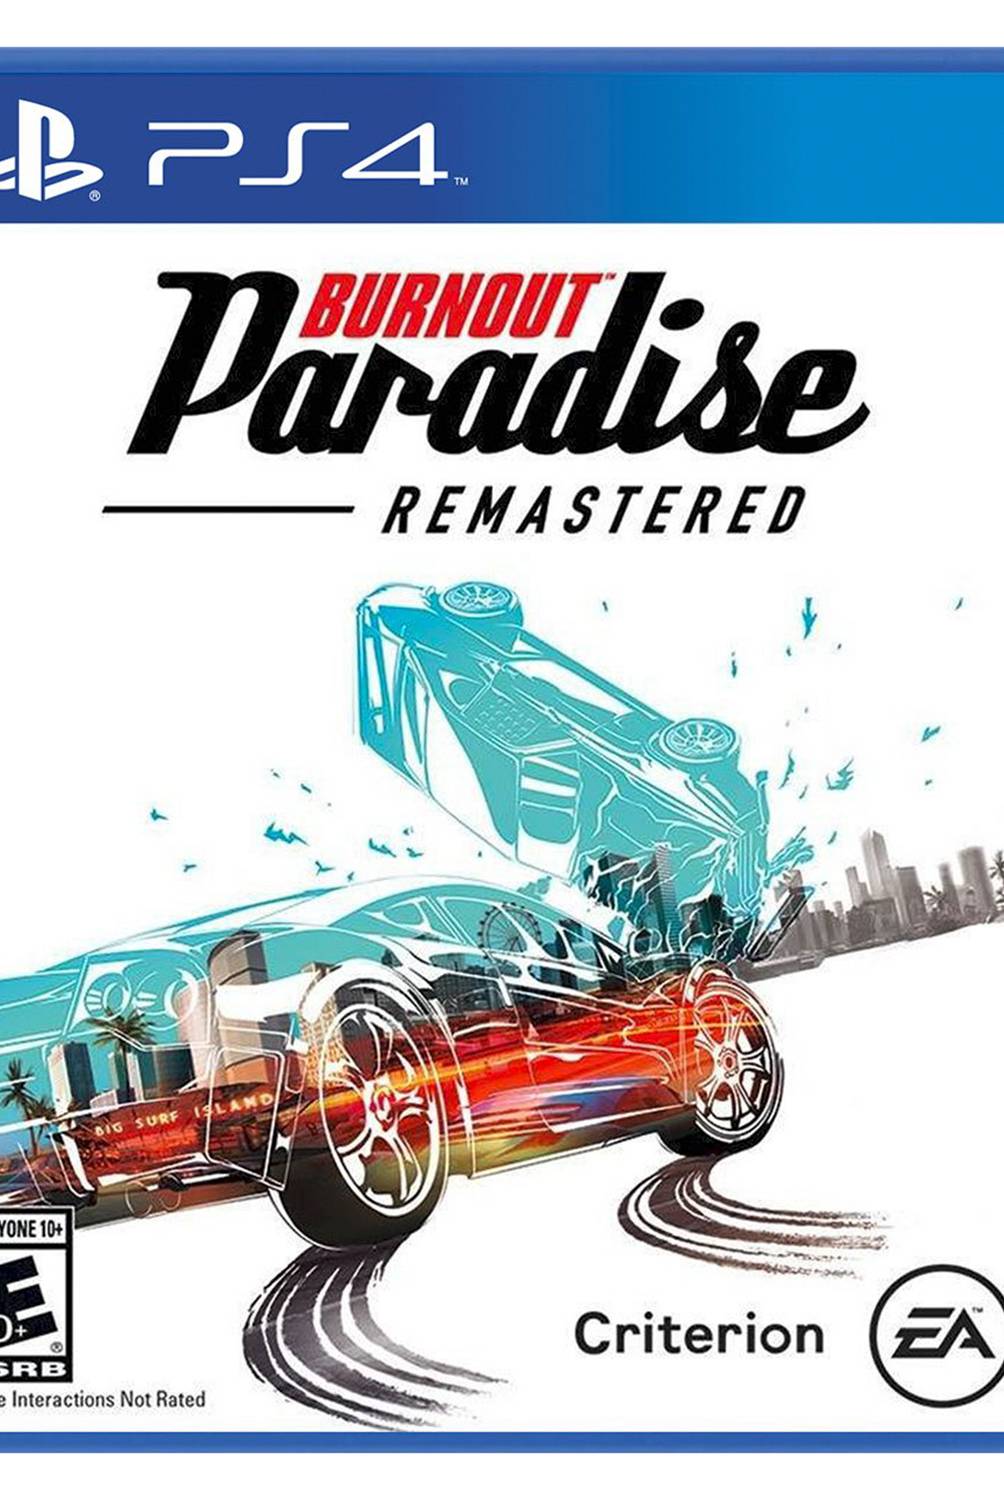 SONY - Burnout Paradise Remastered (PS4)